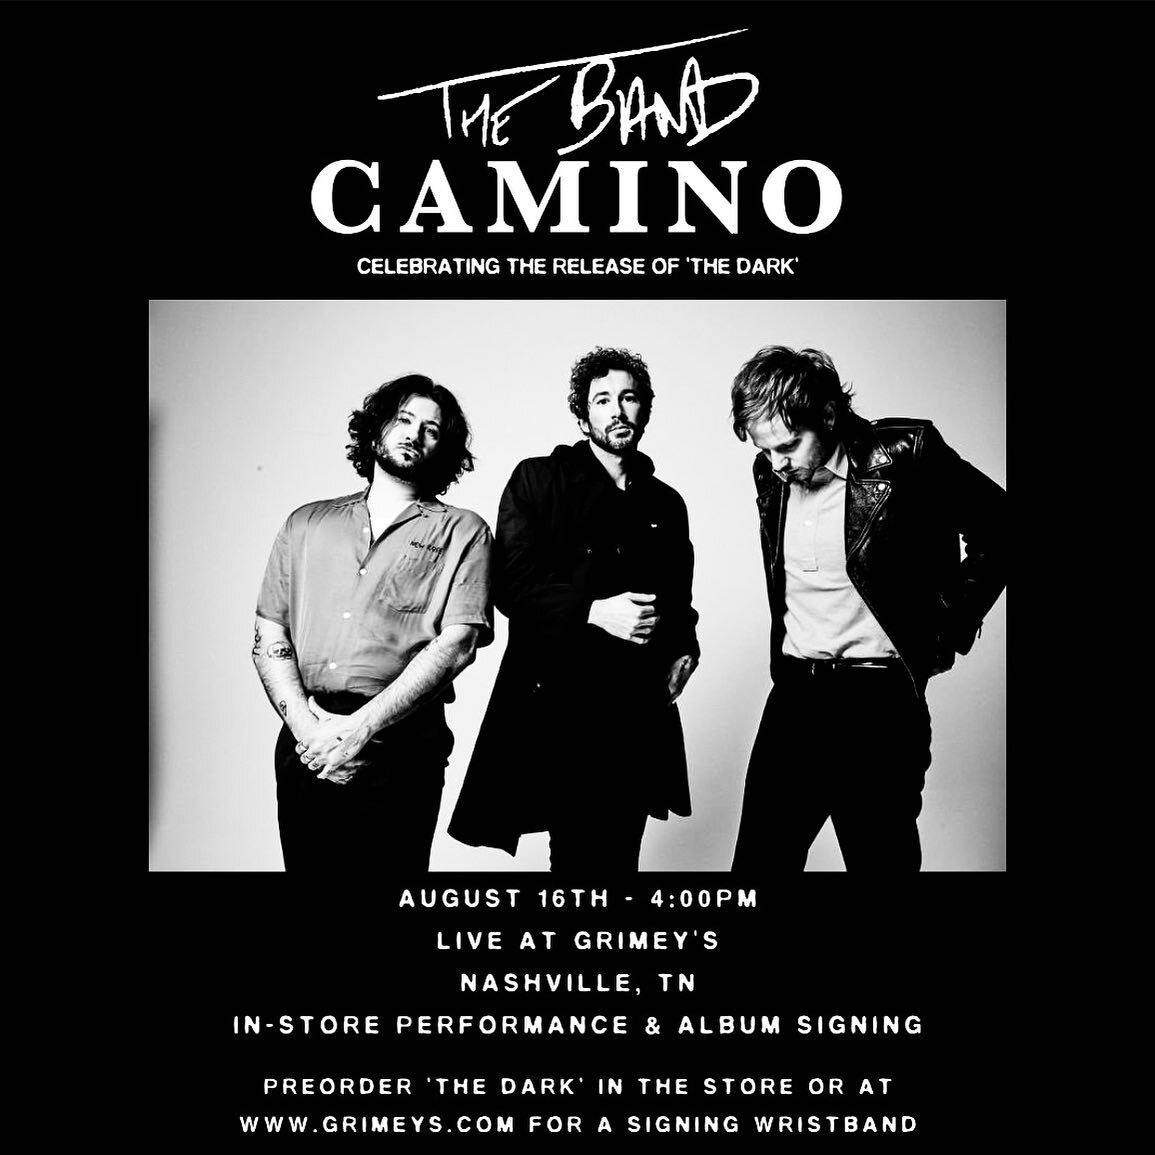 Tag a #TONSmember who needs to go to @thebandcamino x @grimeys on August 16th!! #OtherNashville